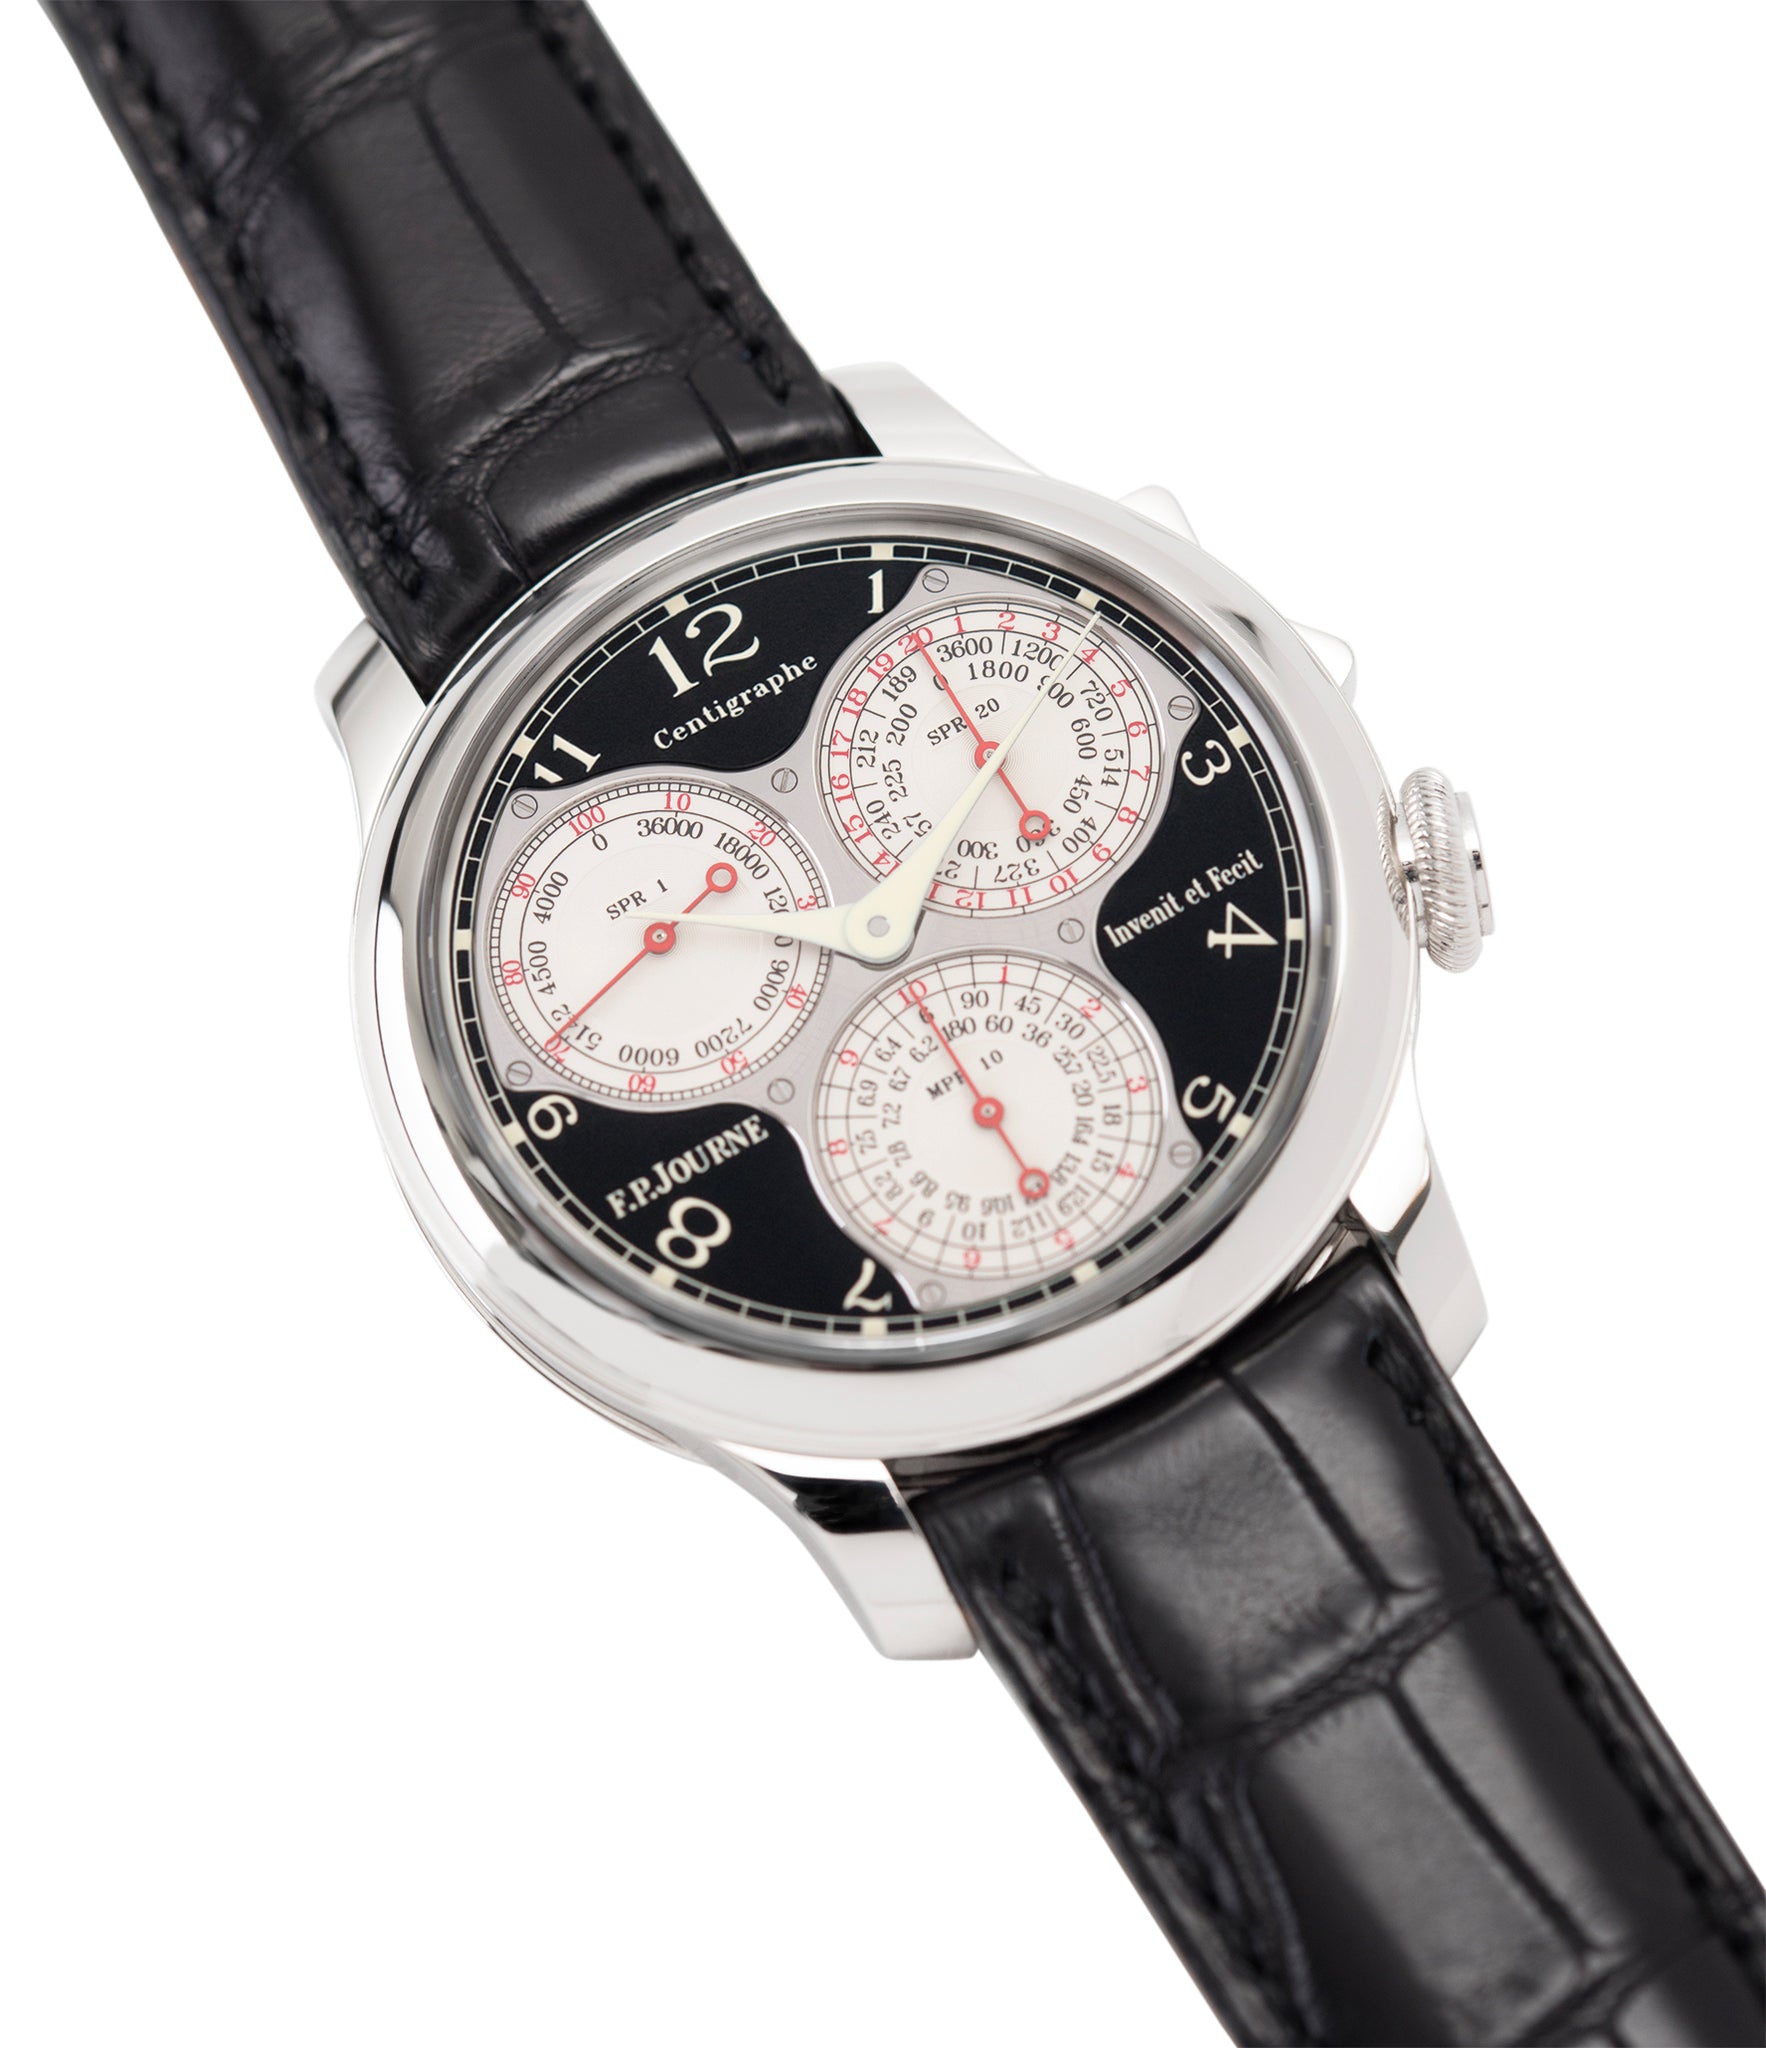 shop F. P. Journe Centigraphe Souverain Black Label 40 mm platinum pre-owned rare watch for sale online at A Collected Man London approved retailer of independent watchmakers